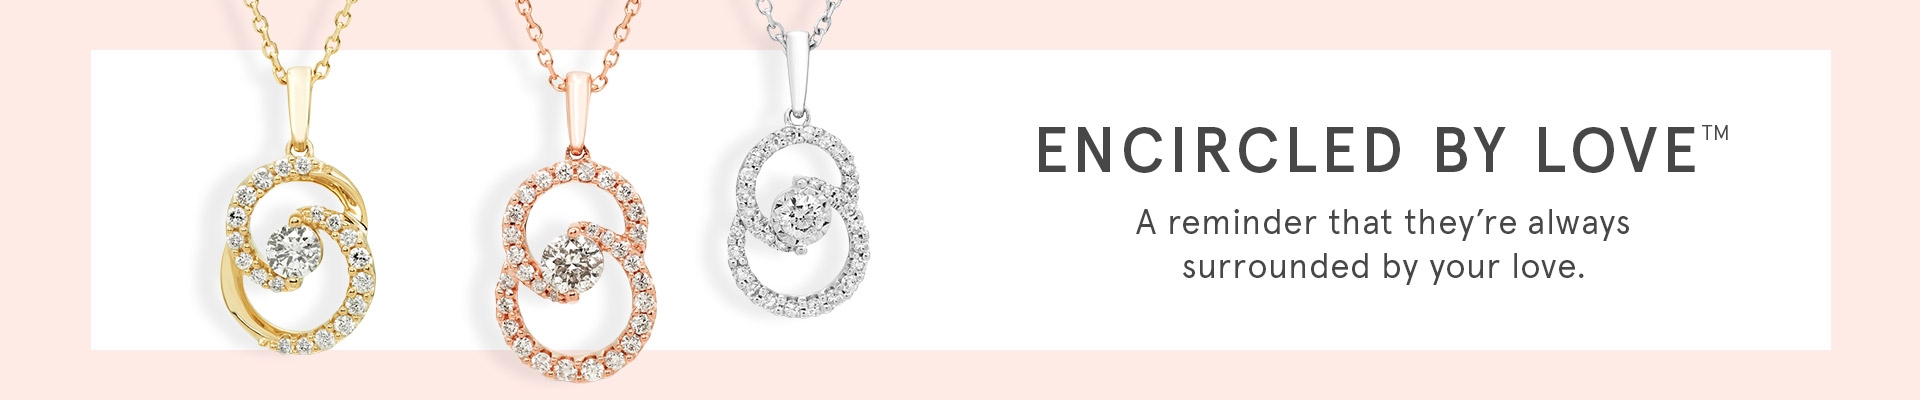 Encircled by Love Collection at KAY